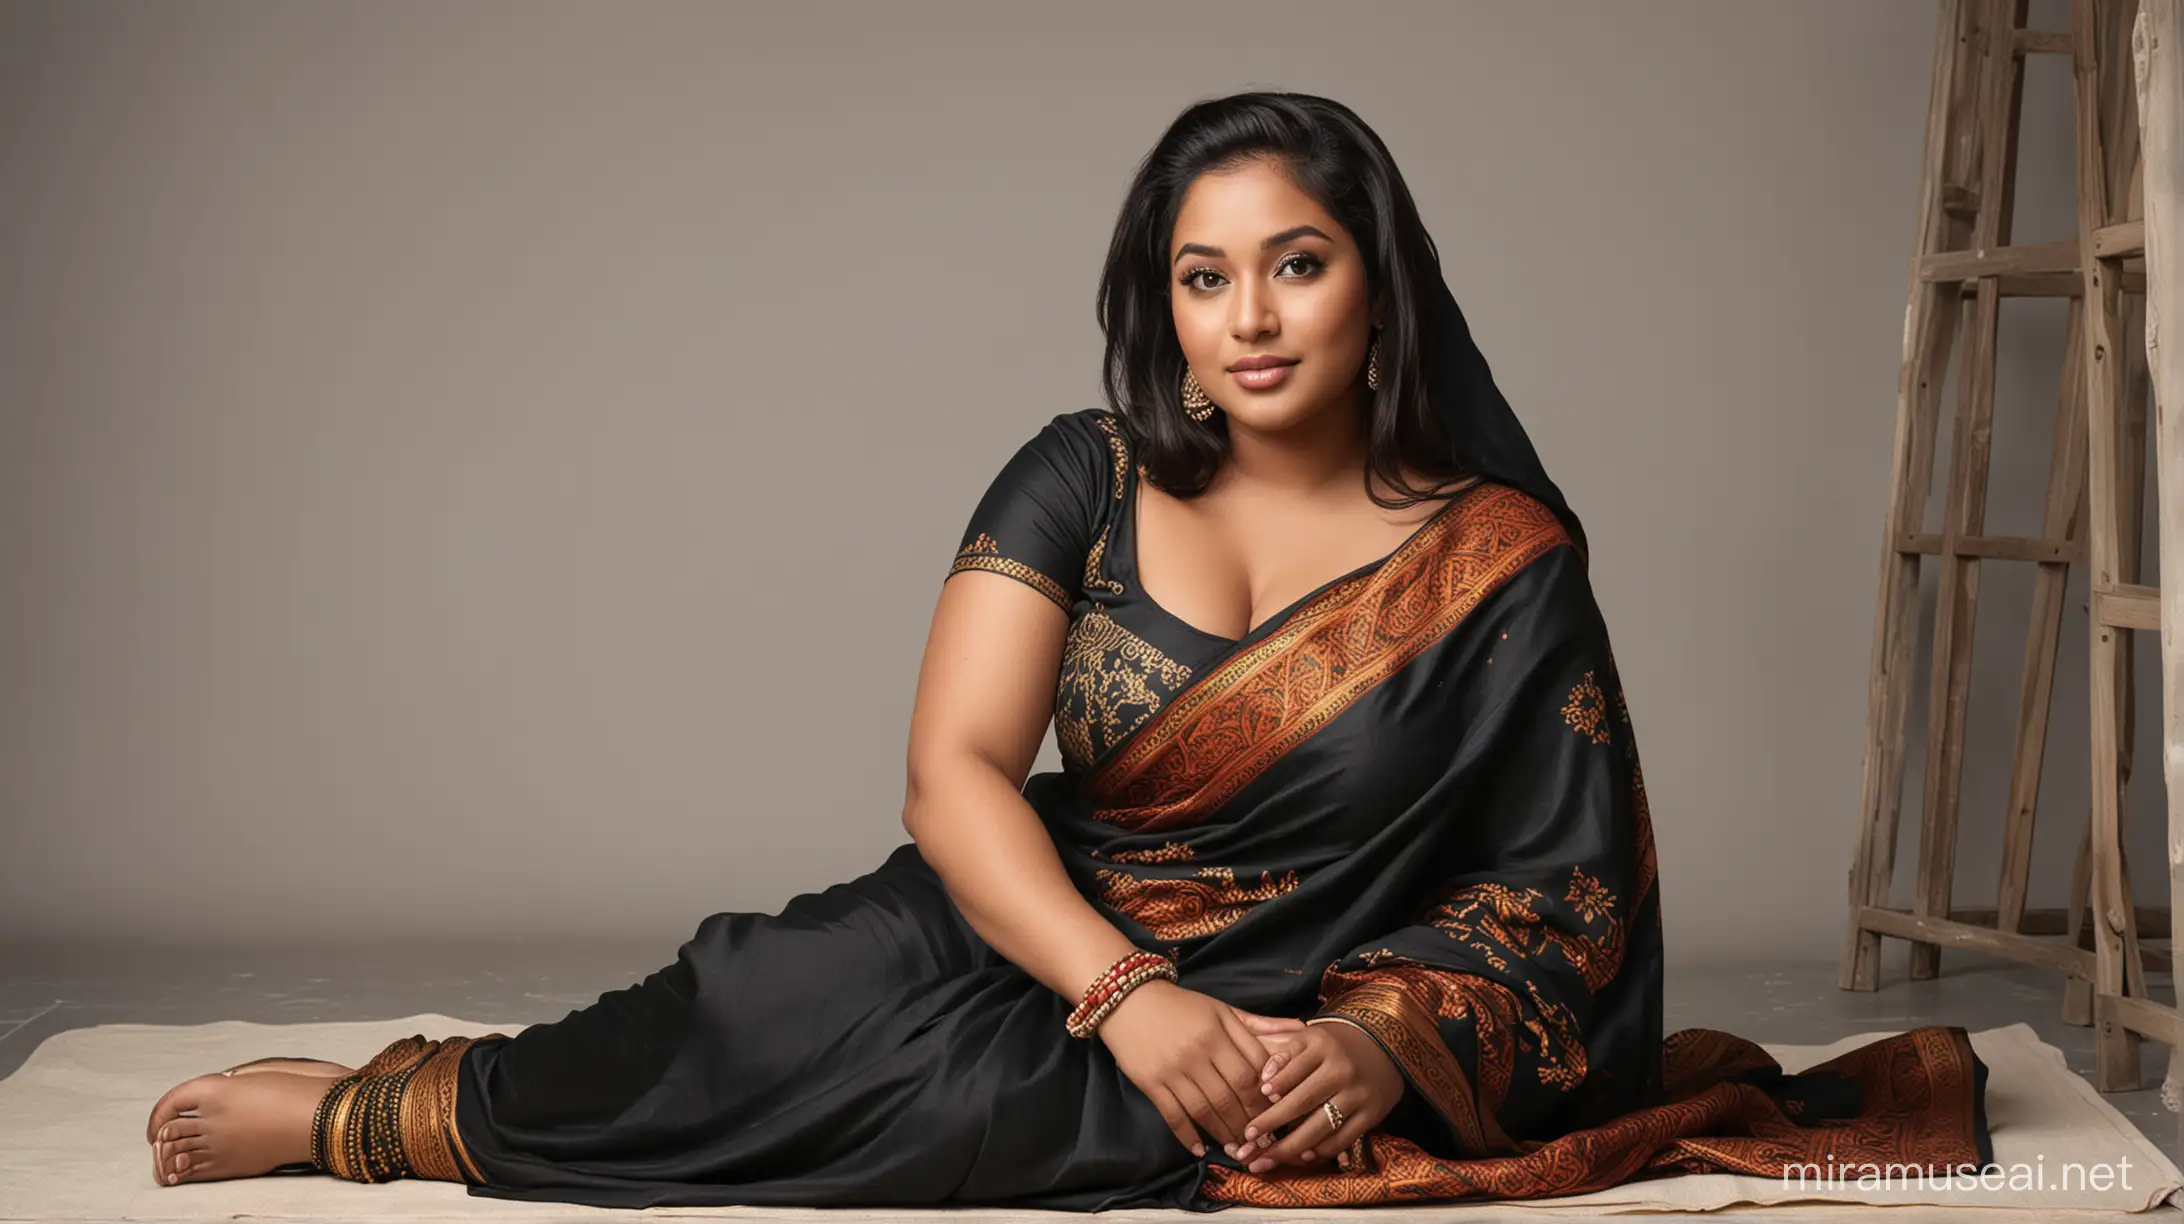 Bangladeshi Plus Size Woman in Traditional Sari with Hood Seated on Floor